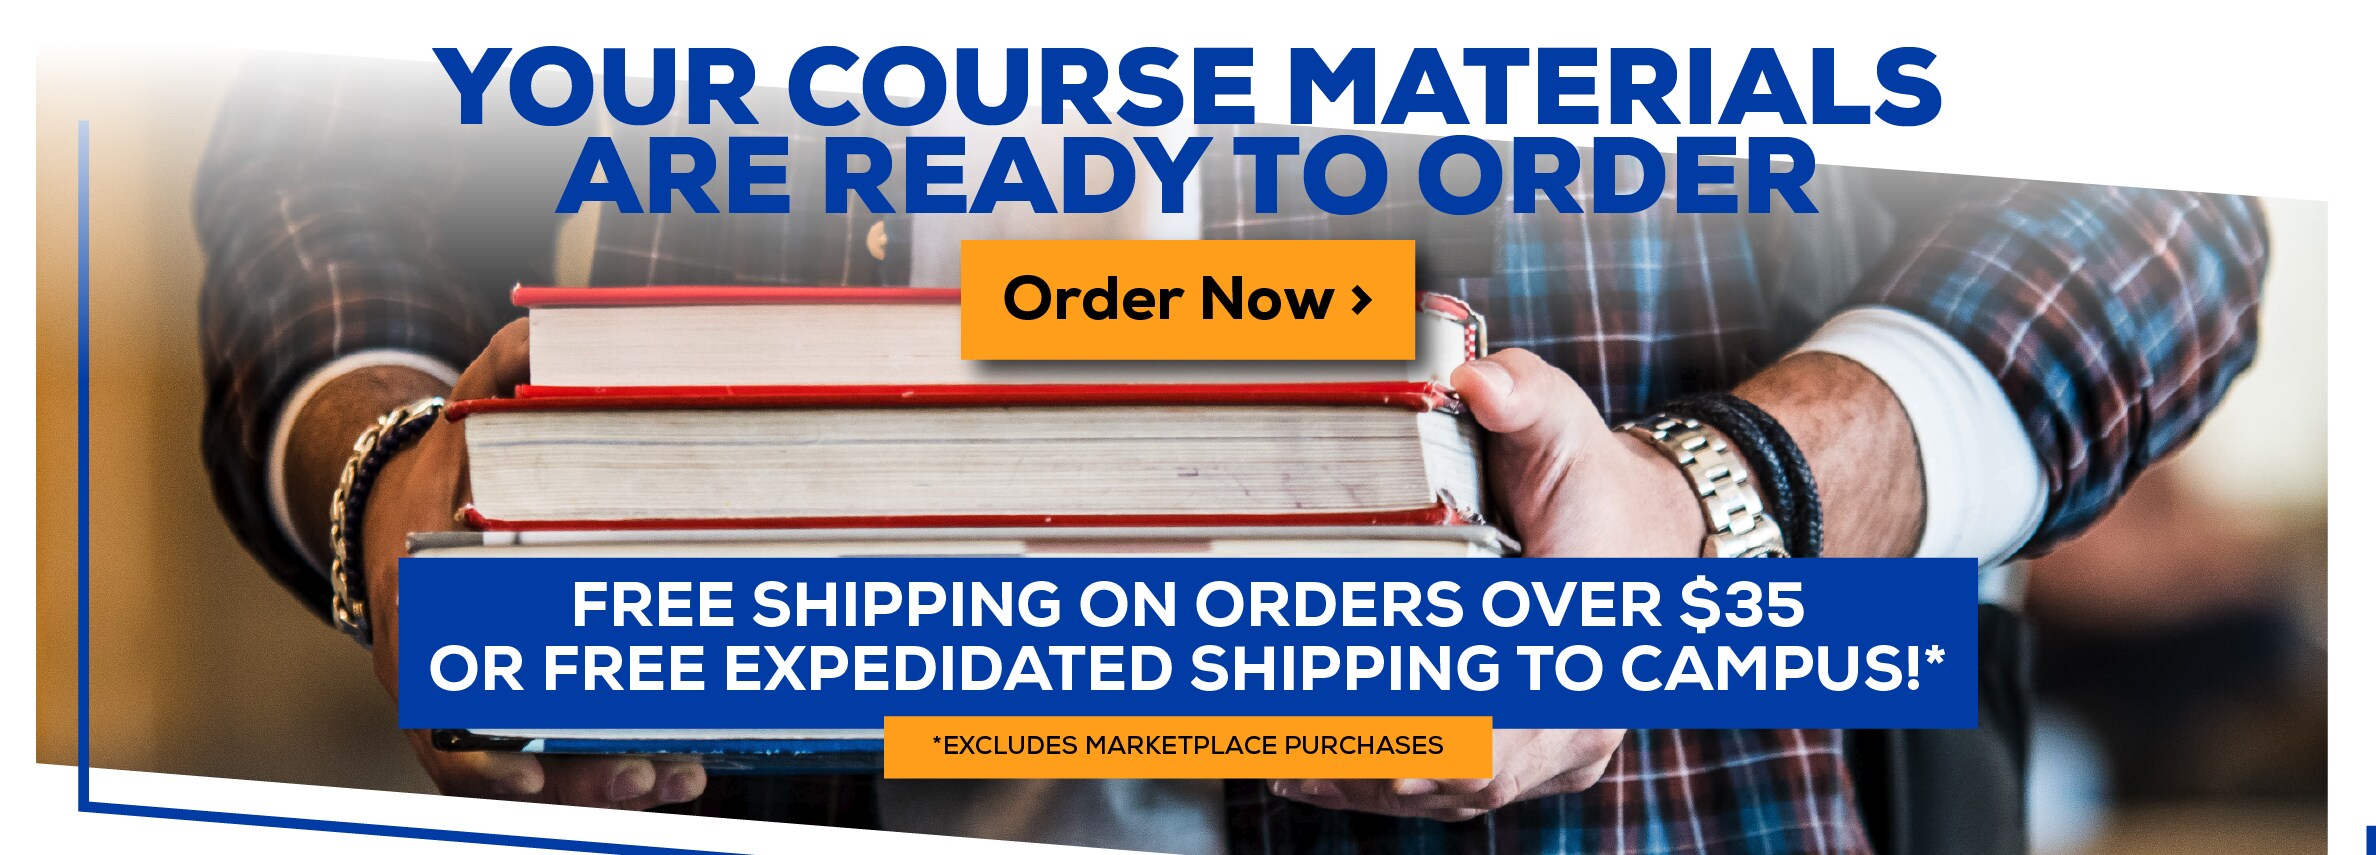 Your Course Materials are Ready to Order. Order Now. Free shipping on orders over $35 or free expedited shipping to campus! *Excludes marketplace purchases.